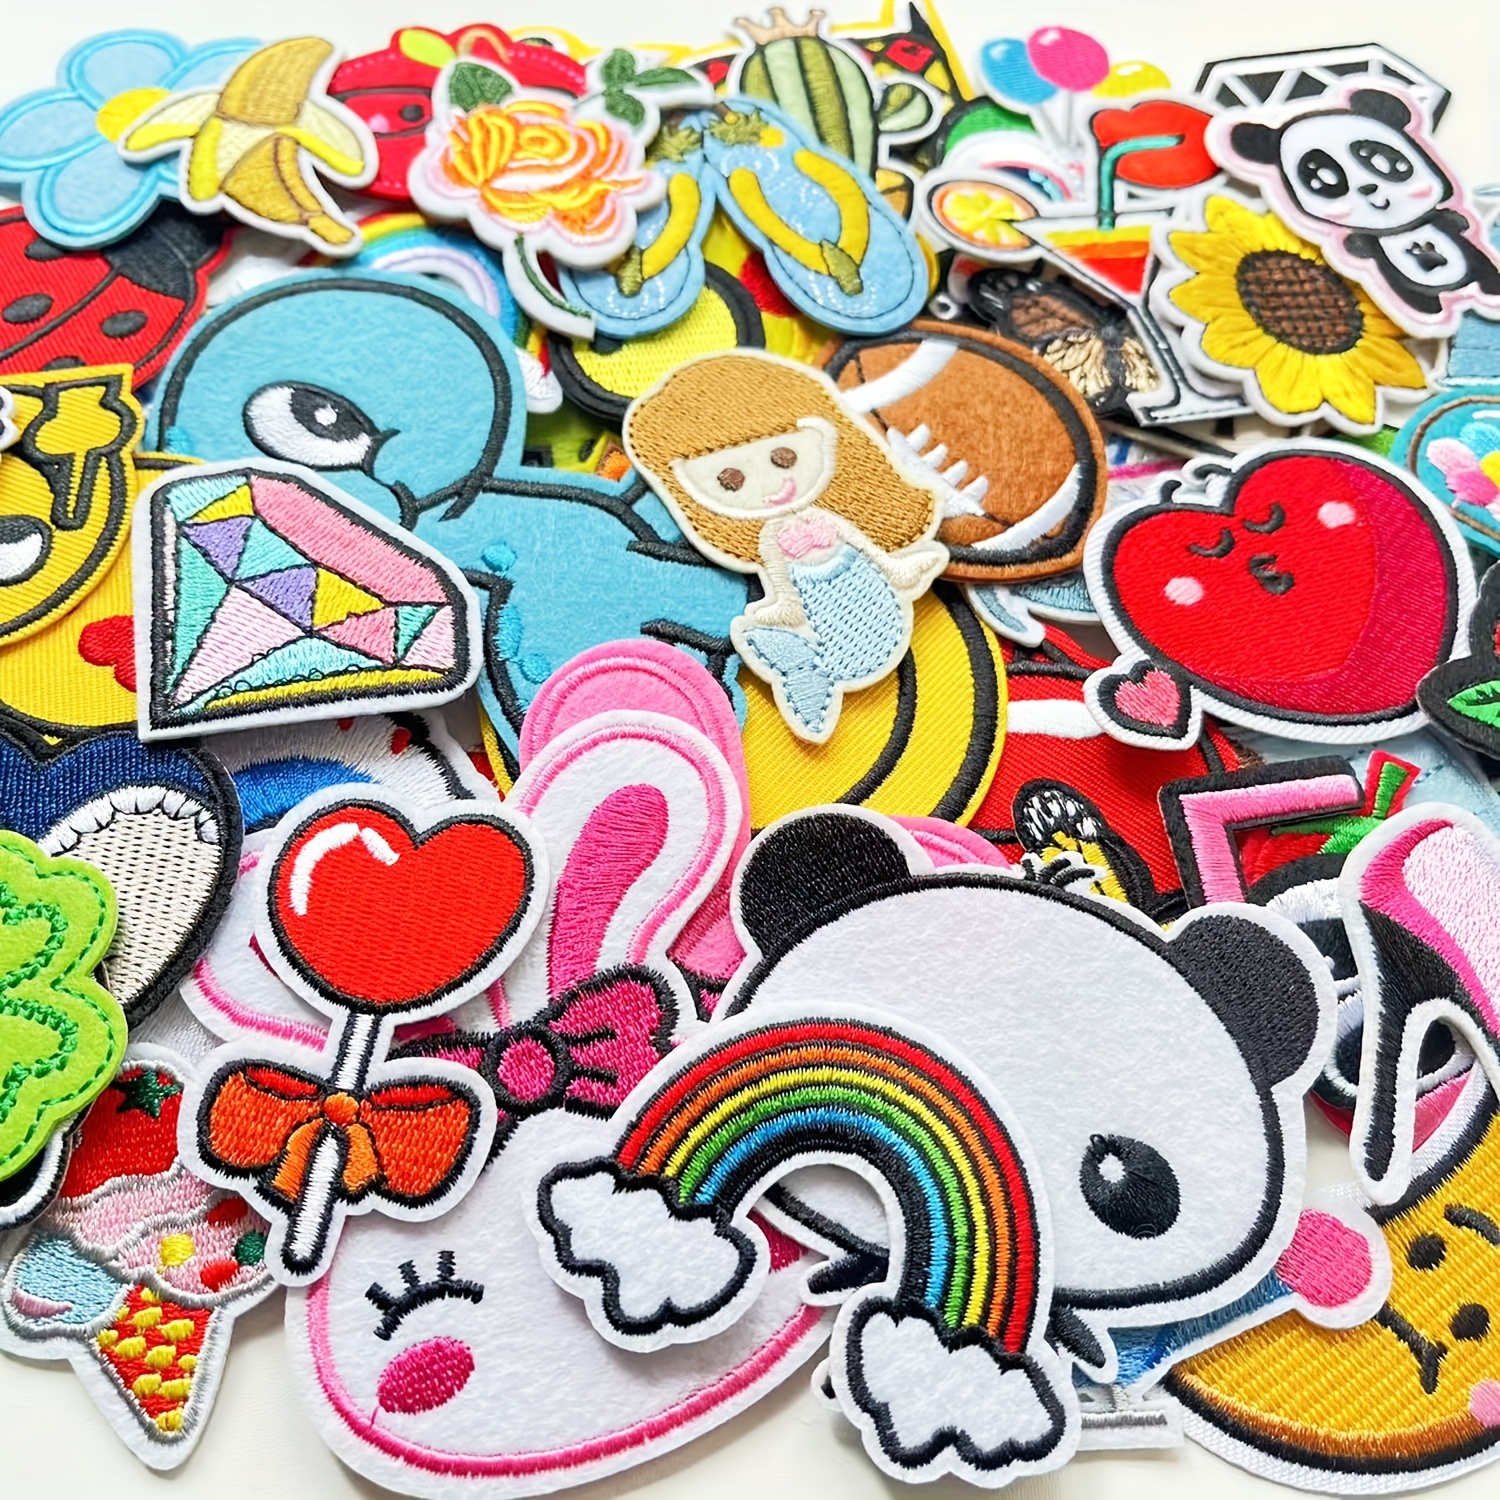 28pcs Cartoon Patch Fabric Stickers Car Fabric Stickers Sewing Stickers  Ironing Stickers Decoration Patch Hole Stickers With Glue Applique Clothes